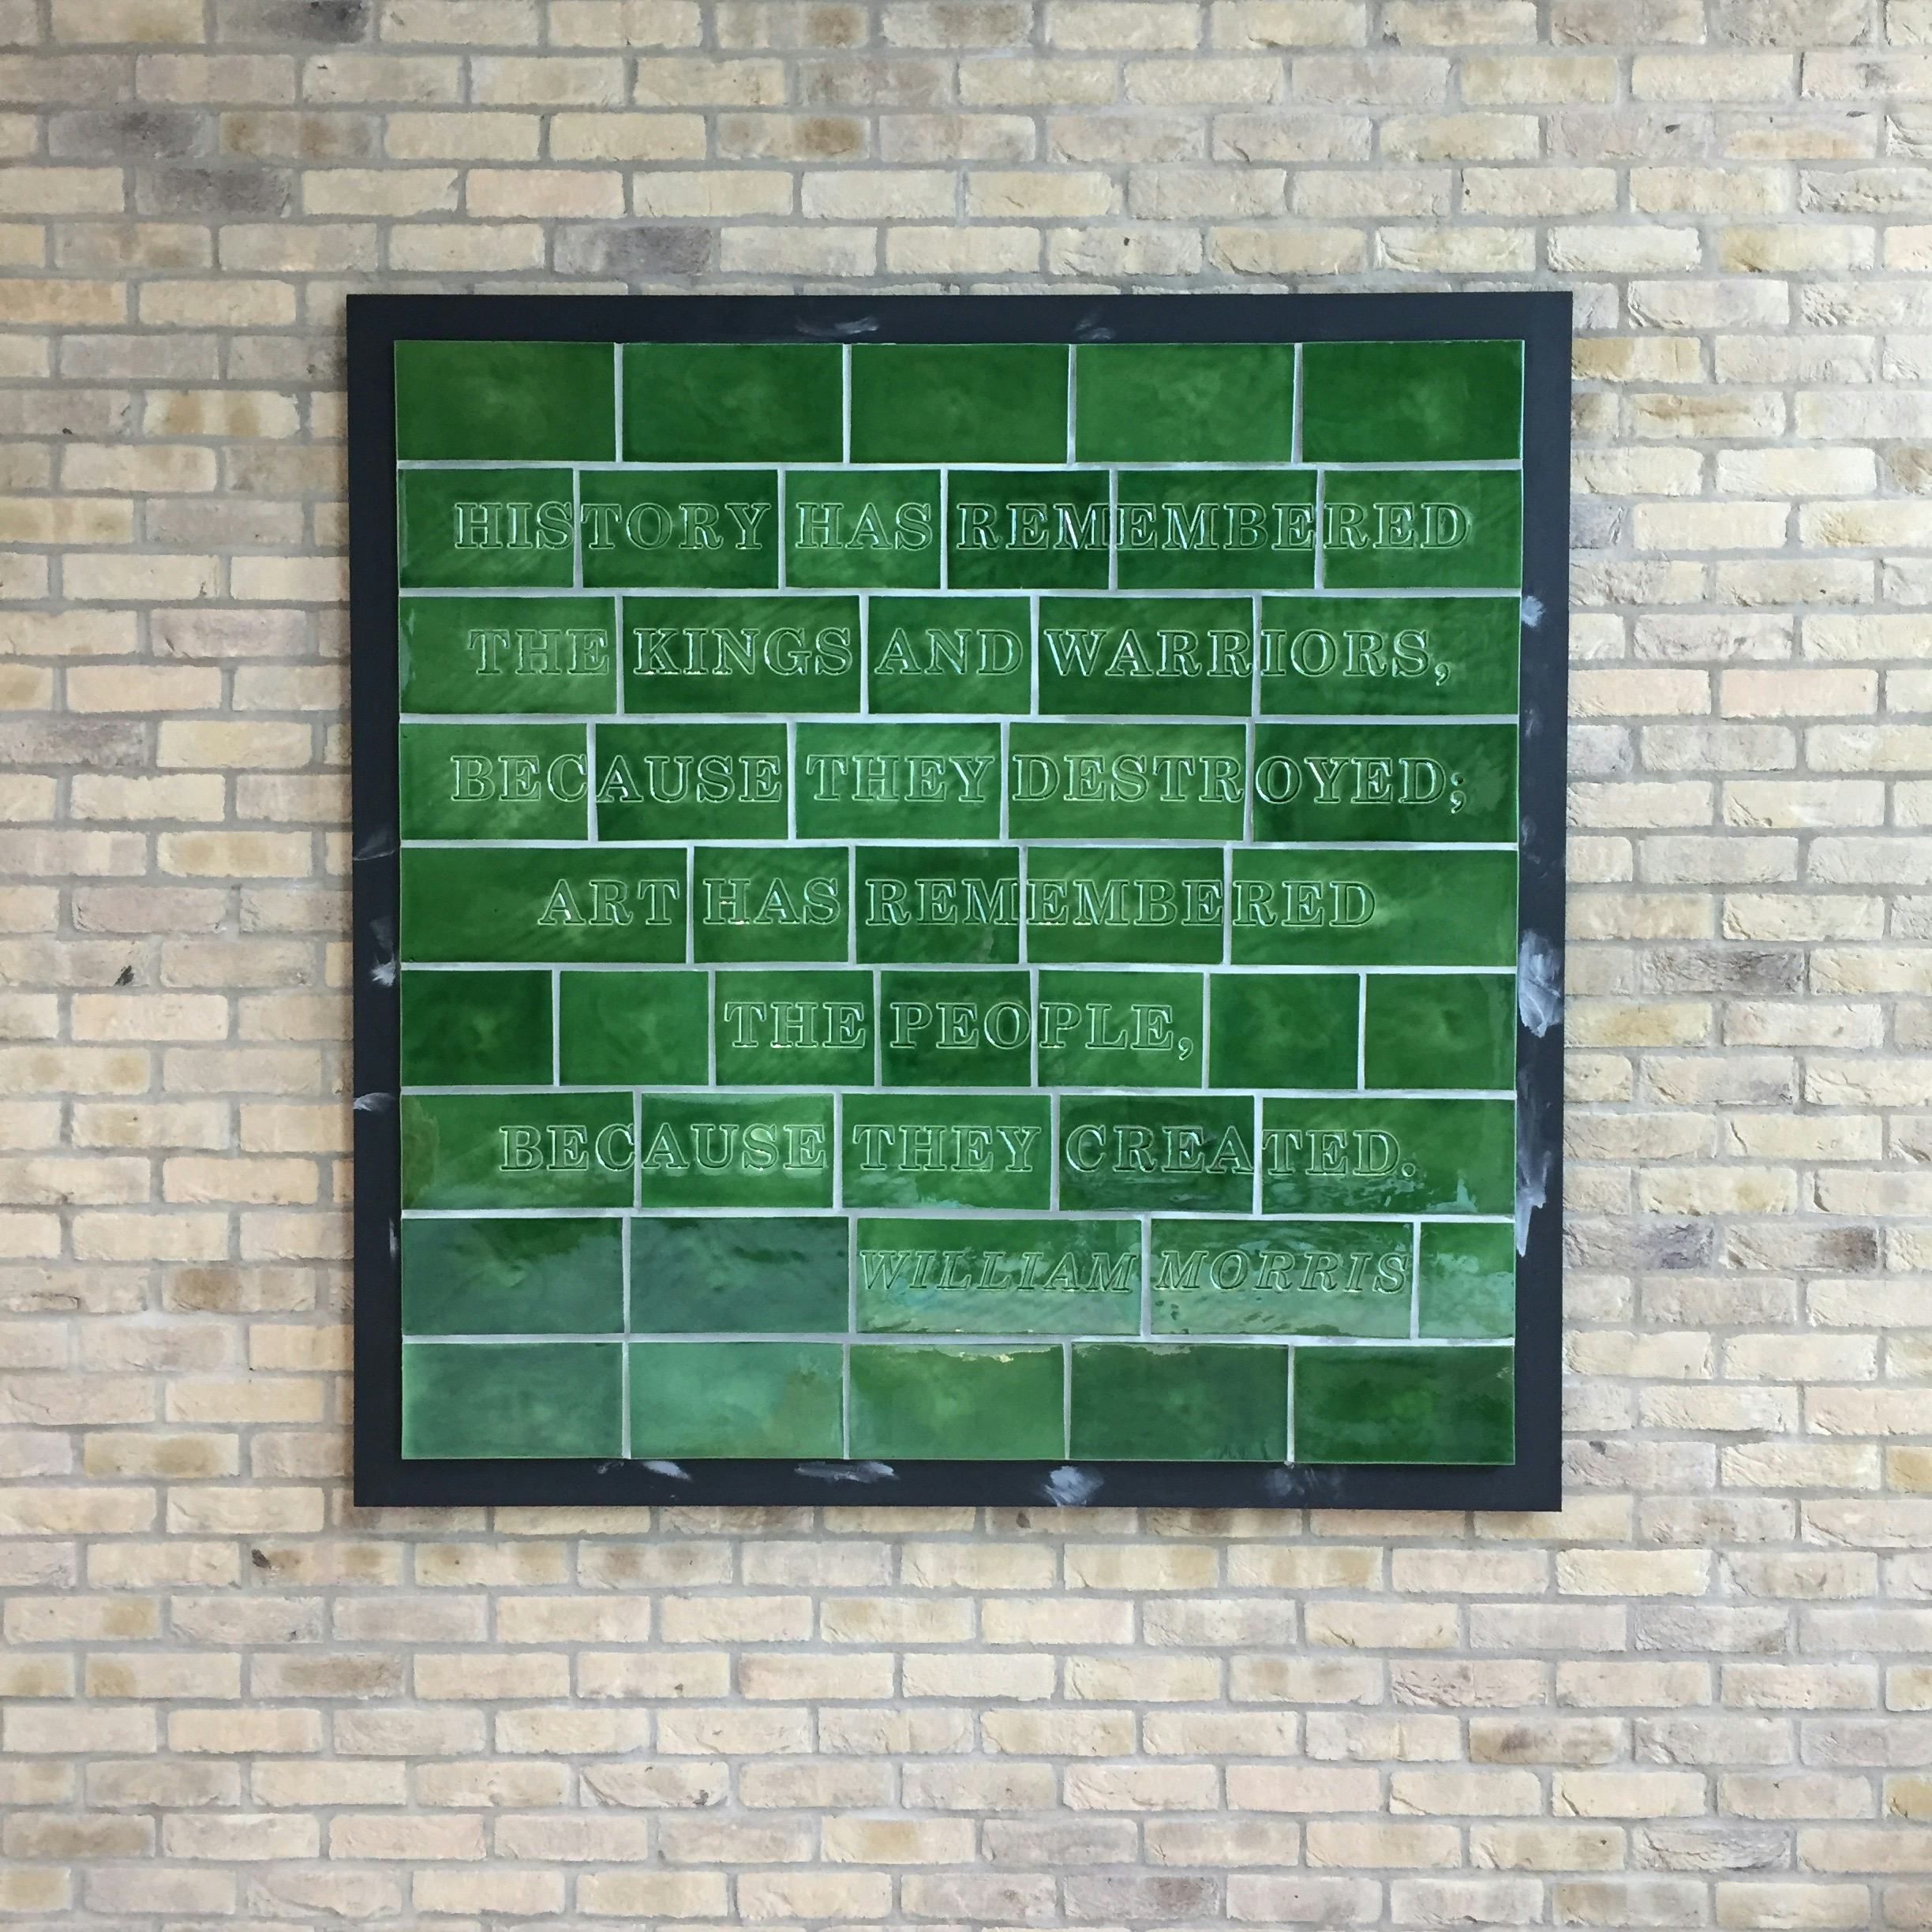 A green tiled artwork hangs on a brick wall. The text ‘History has remembered the kings and warriors, because they destroyed; art has remembered the people, because they created. William Morris’ is debossed into the tiles